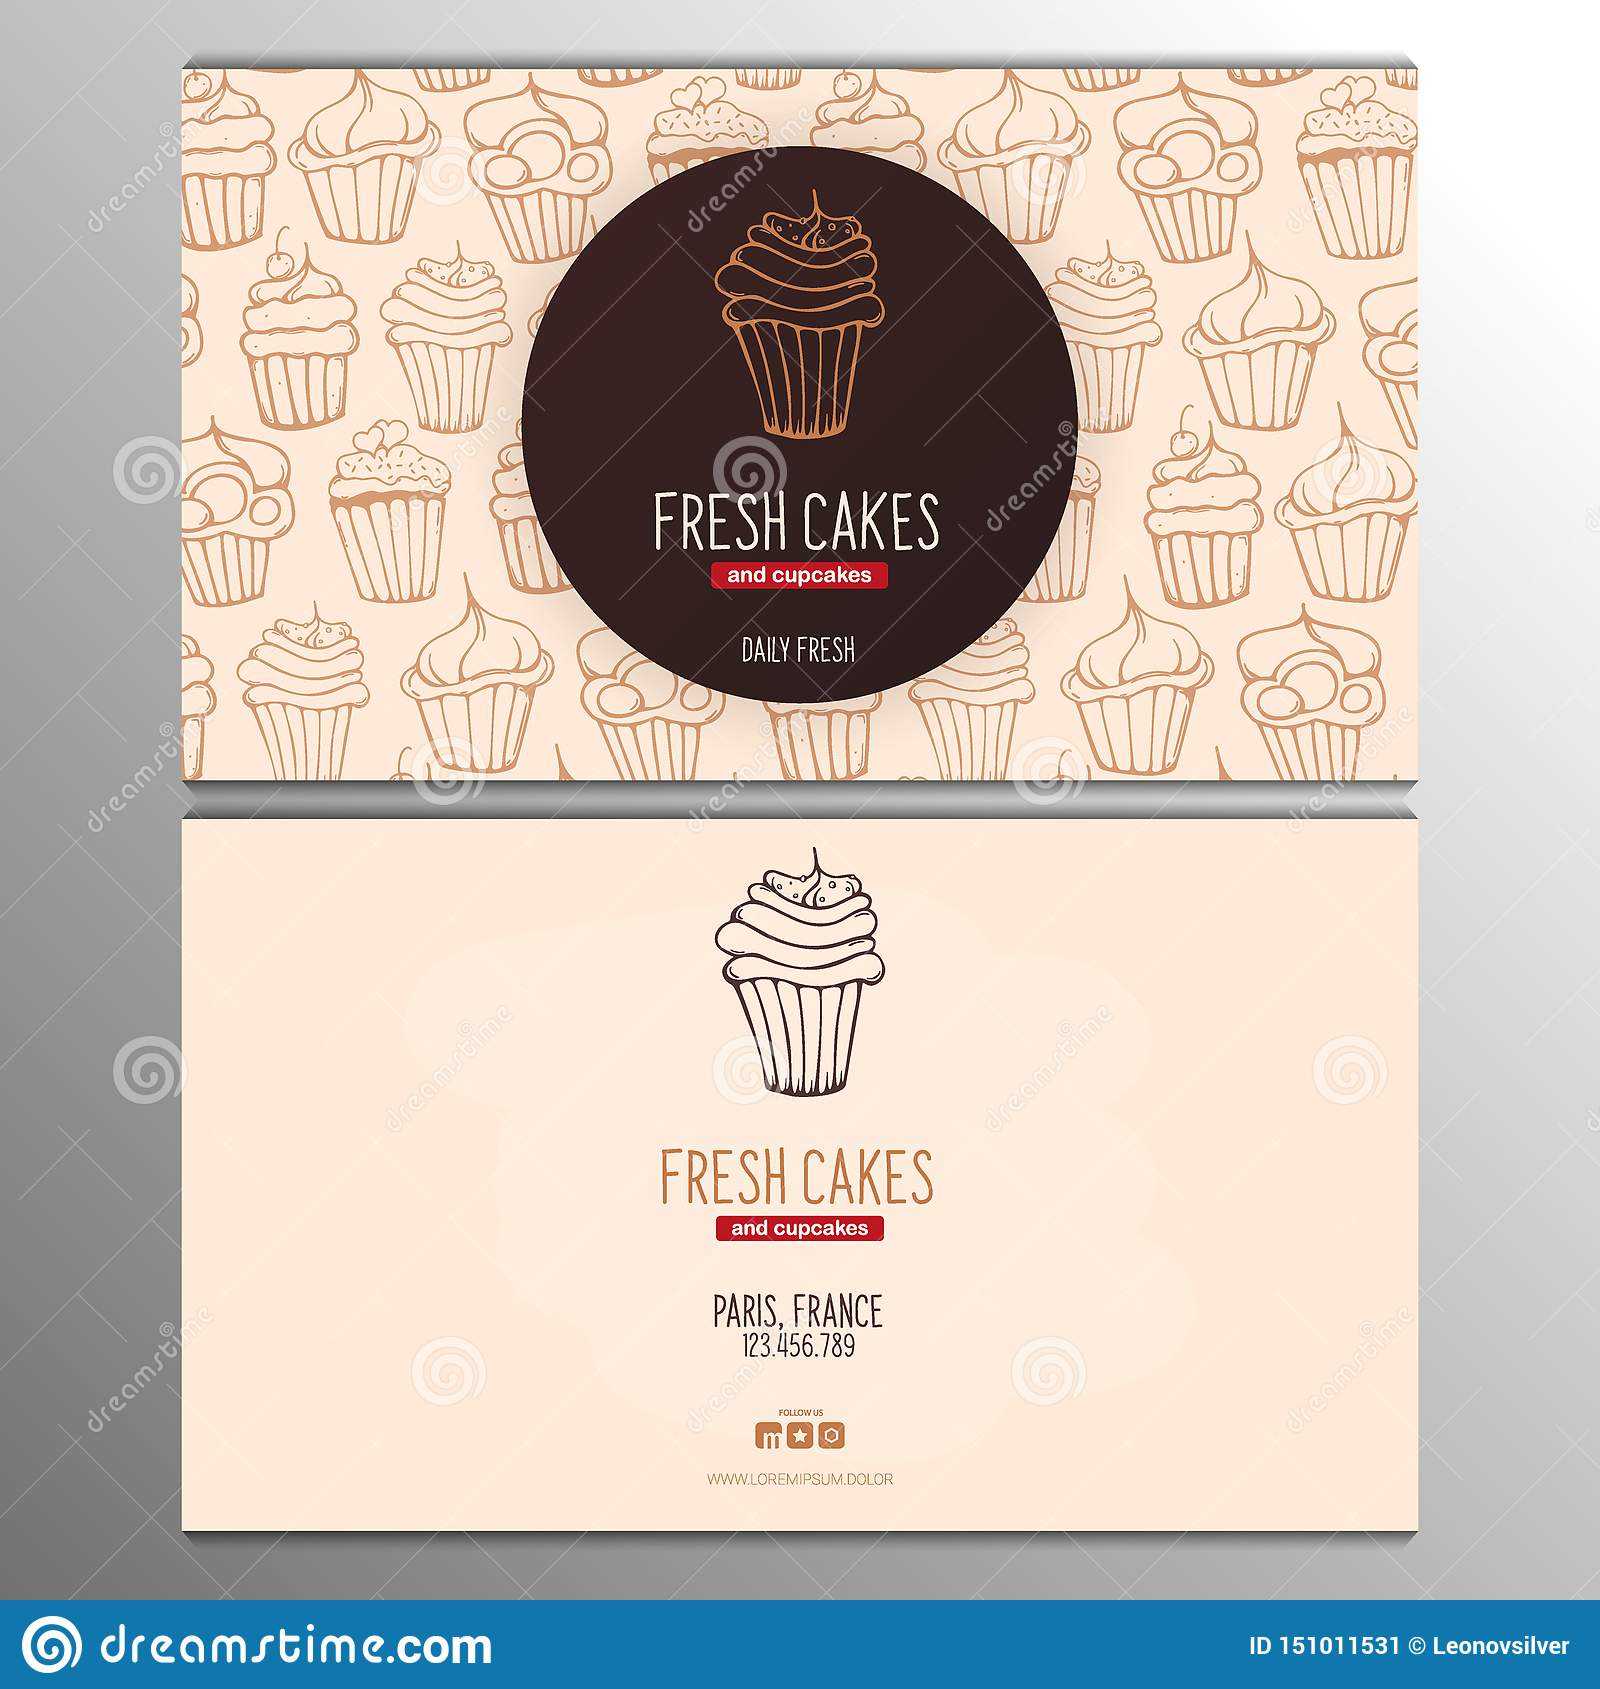 Cupcake Or Cake Business Card Template For Bakery Or Pastry With Regard To Cake Business Cards Templates Free